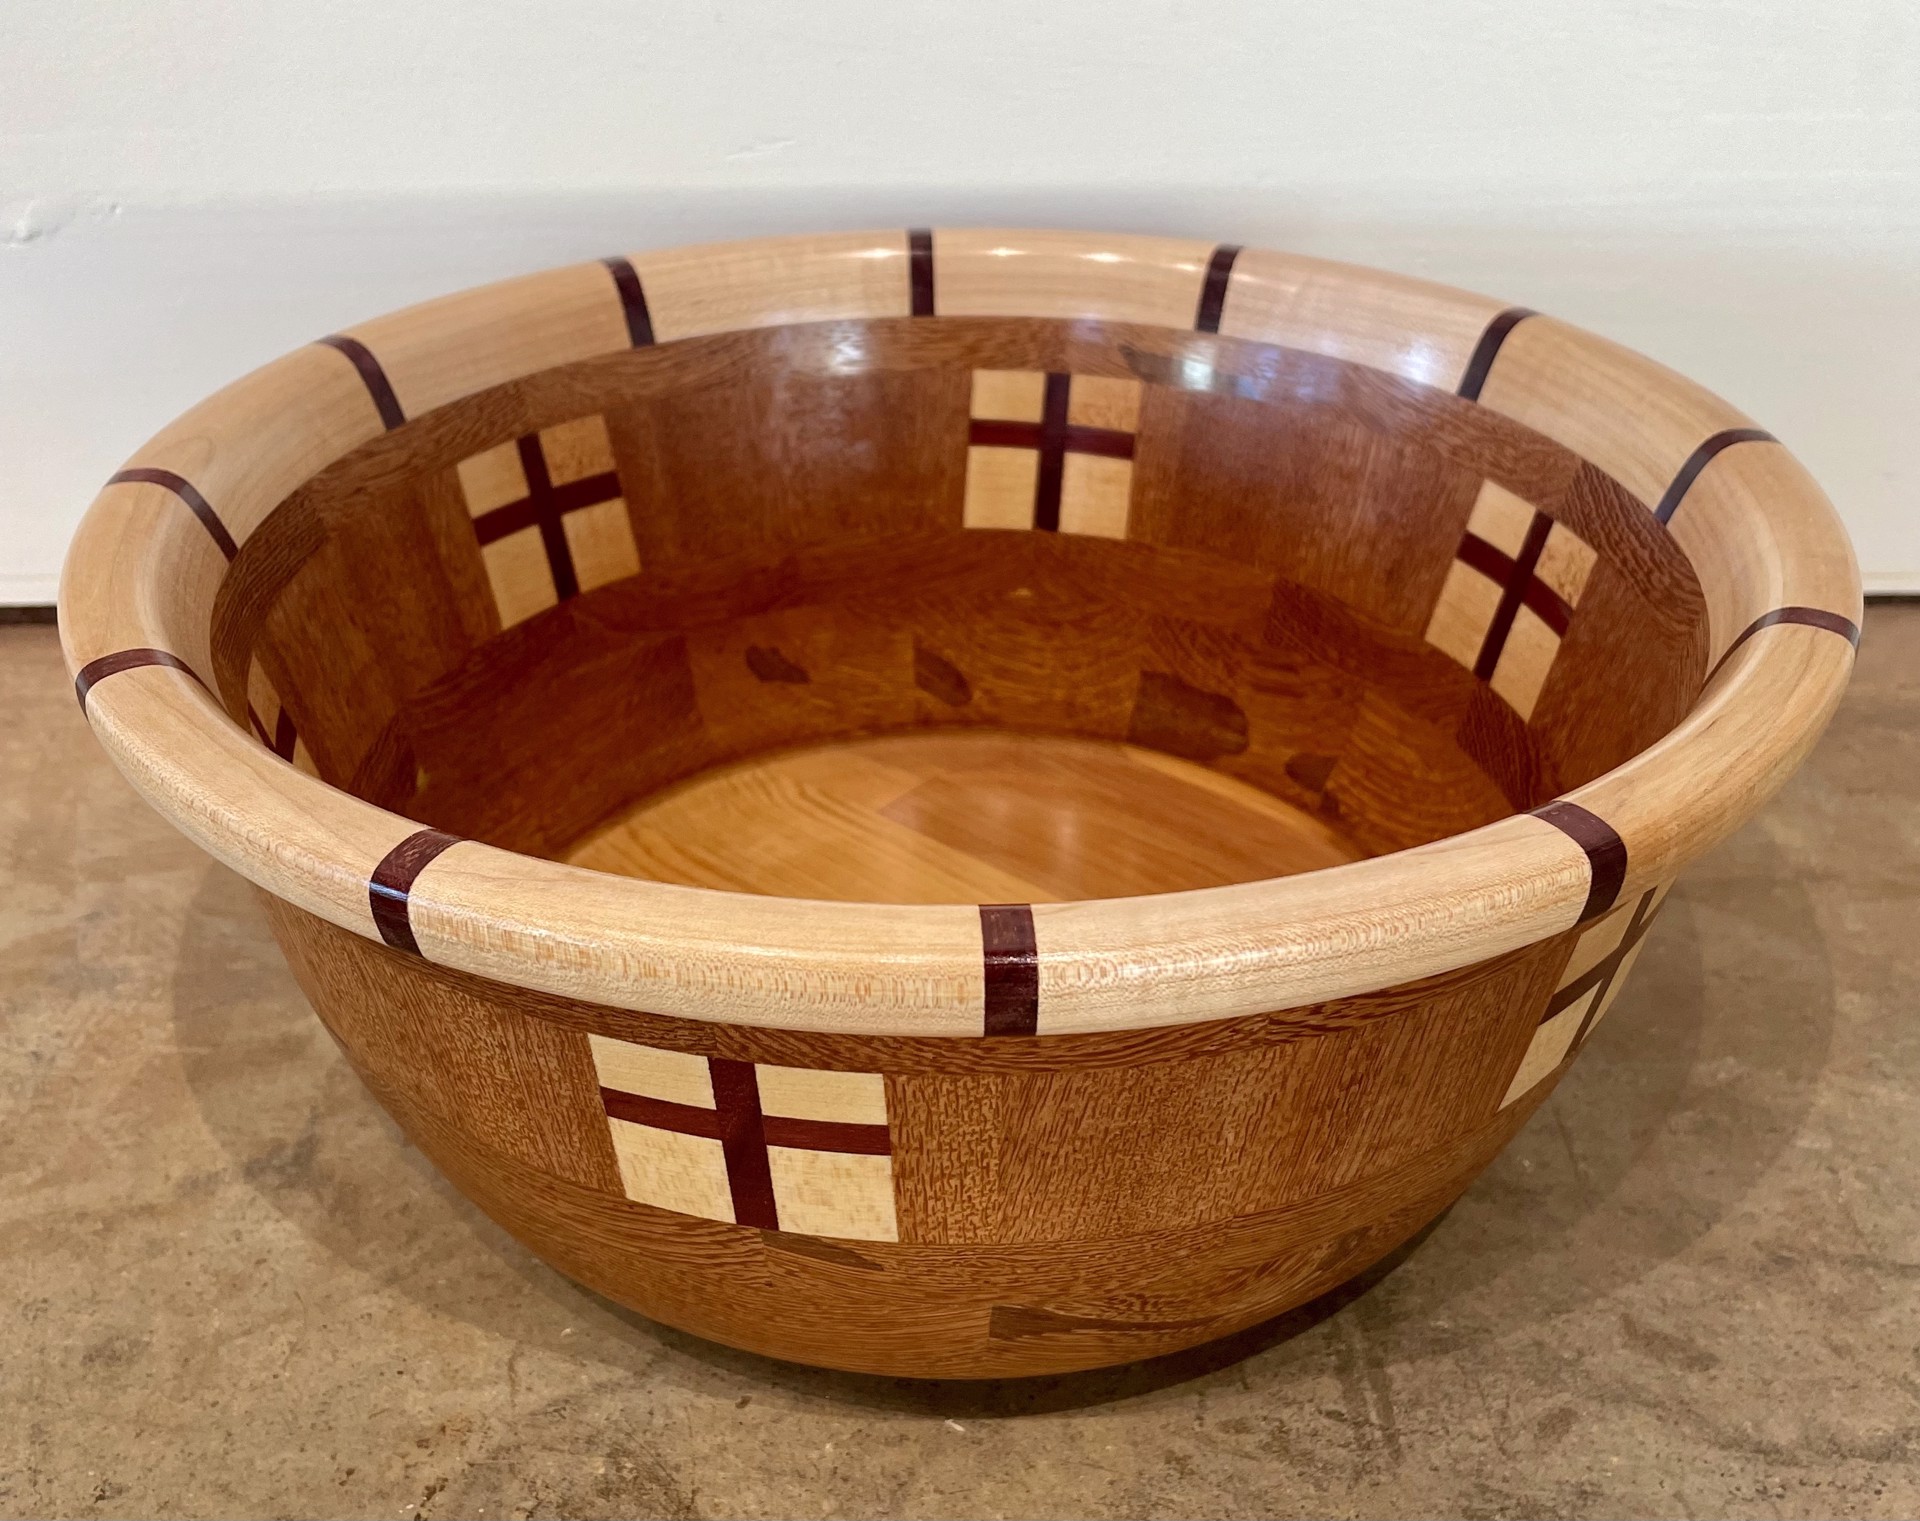 Hand Carved Bowl No. 2 by William Dunaway